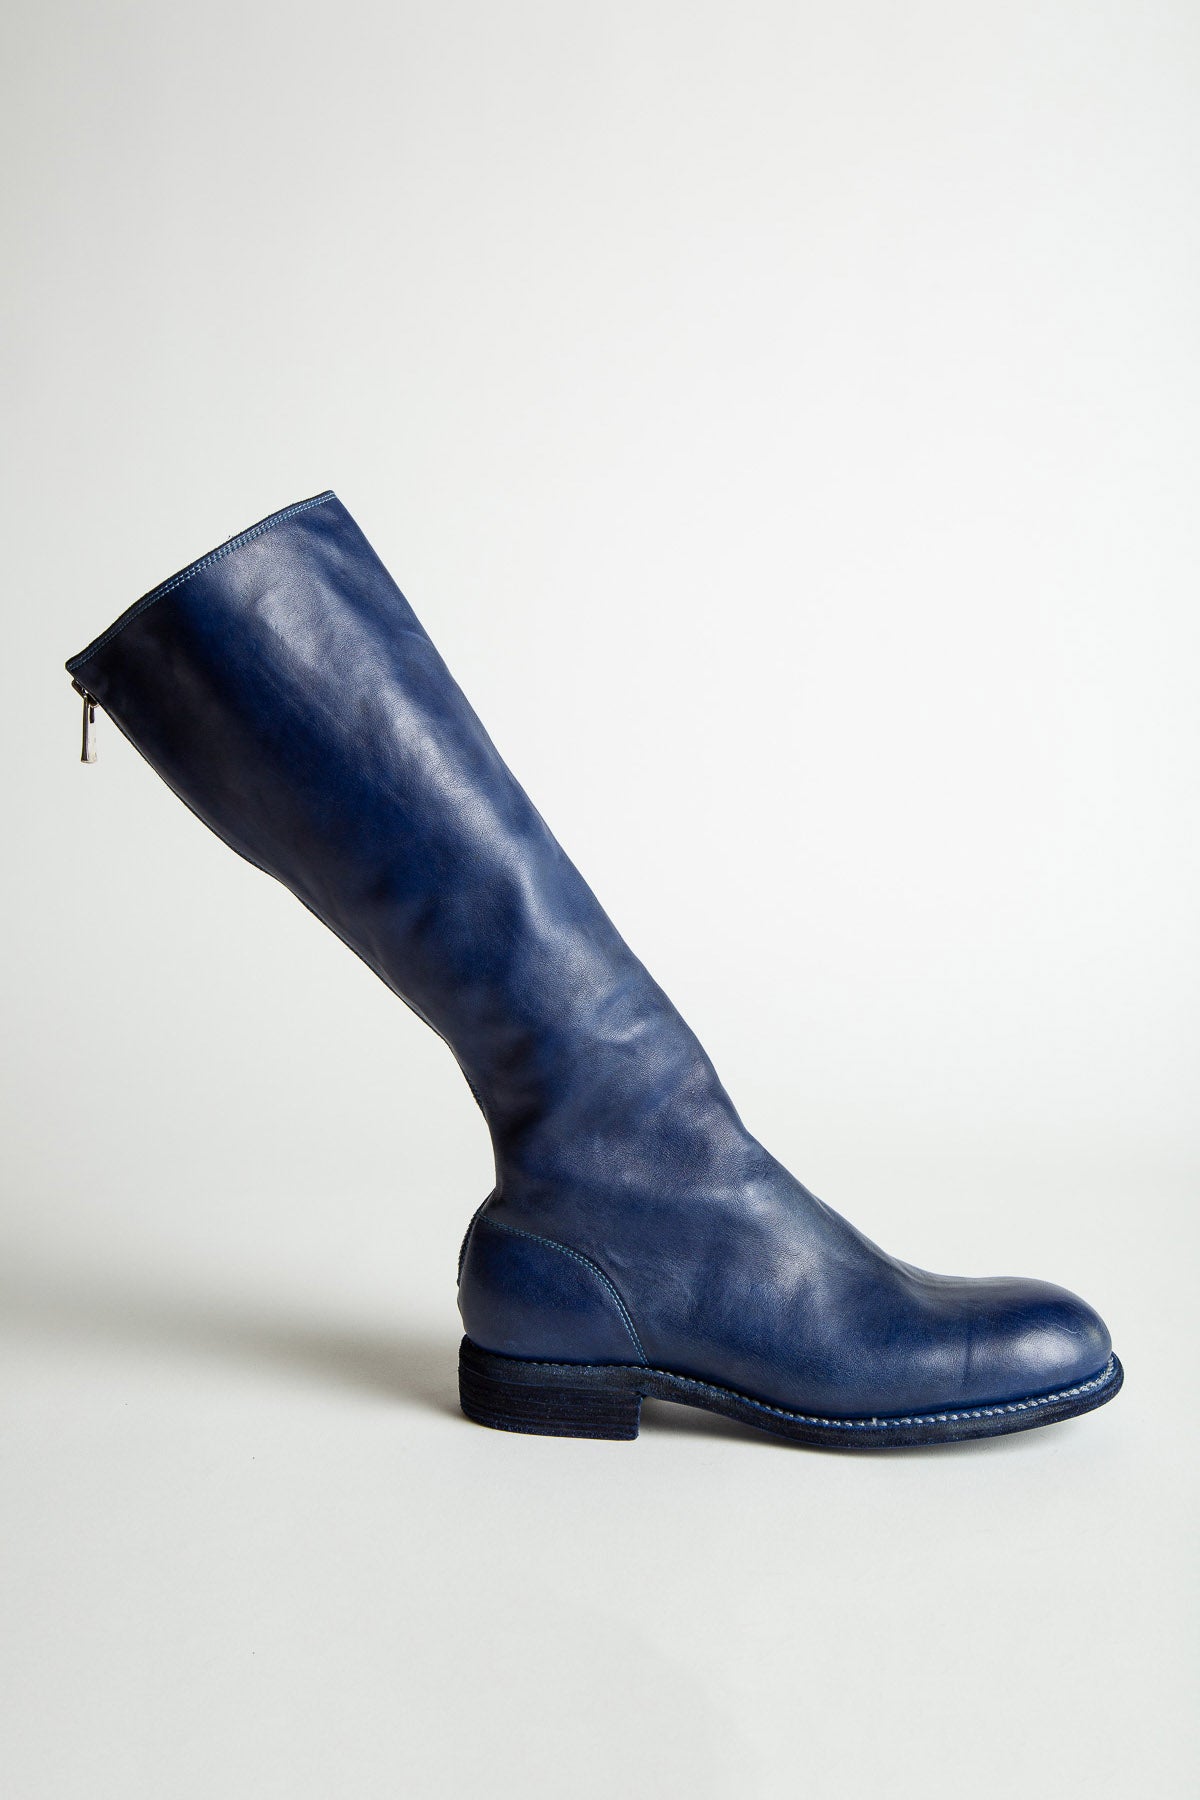 GUIDI | LEATHER BACK ZIP MID-CALF BOOTS